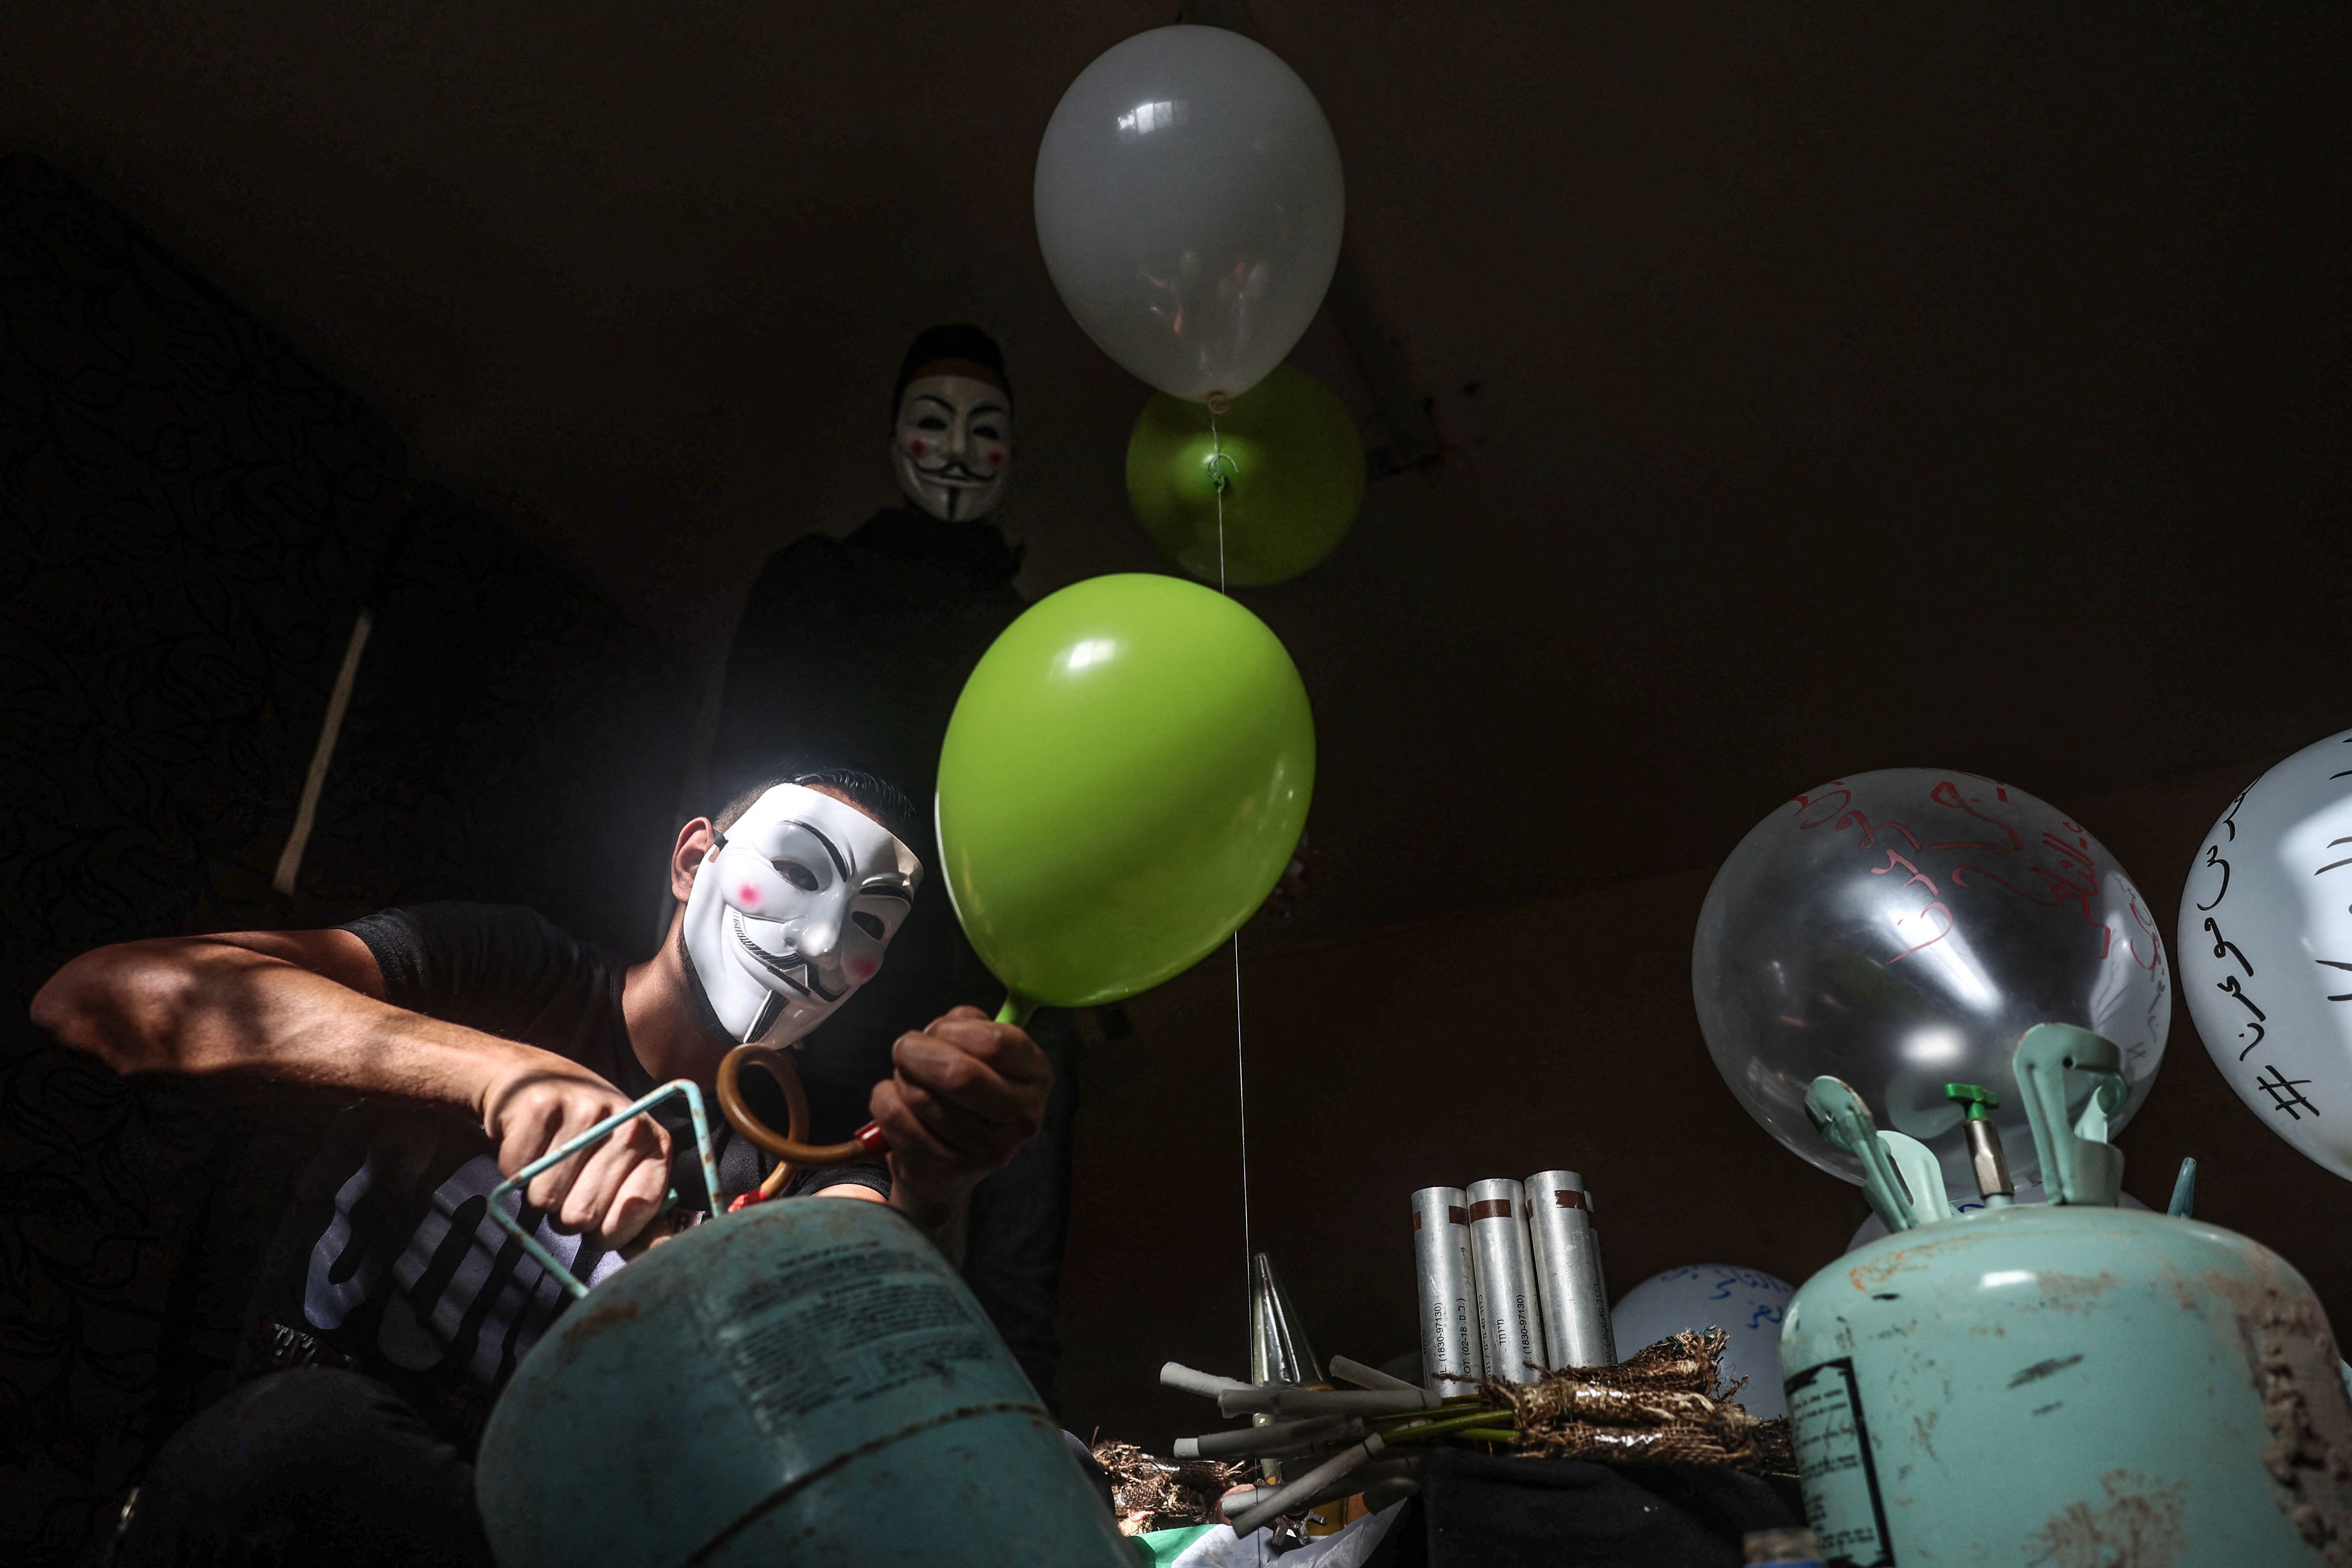 Masked Palestinian followers of the Hamas movement prepare incendiary balloons with anti-Israel slogans written on them, near Beit Lahia in the Gaza Strip